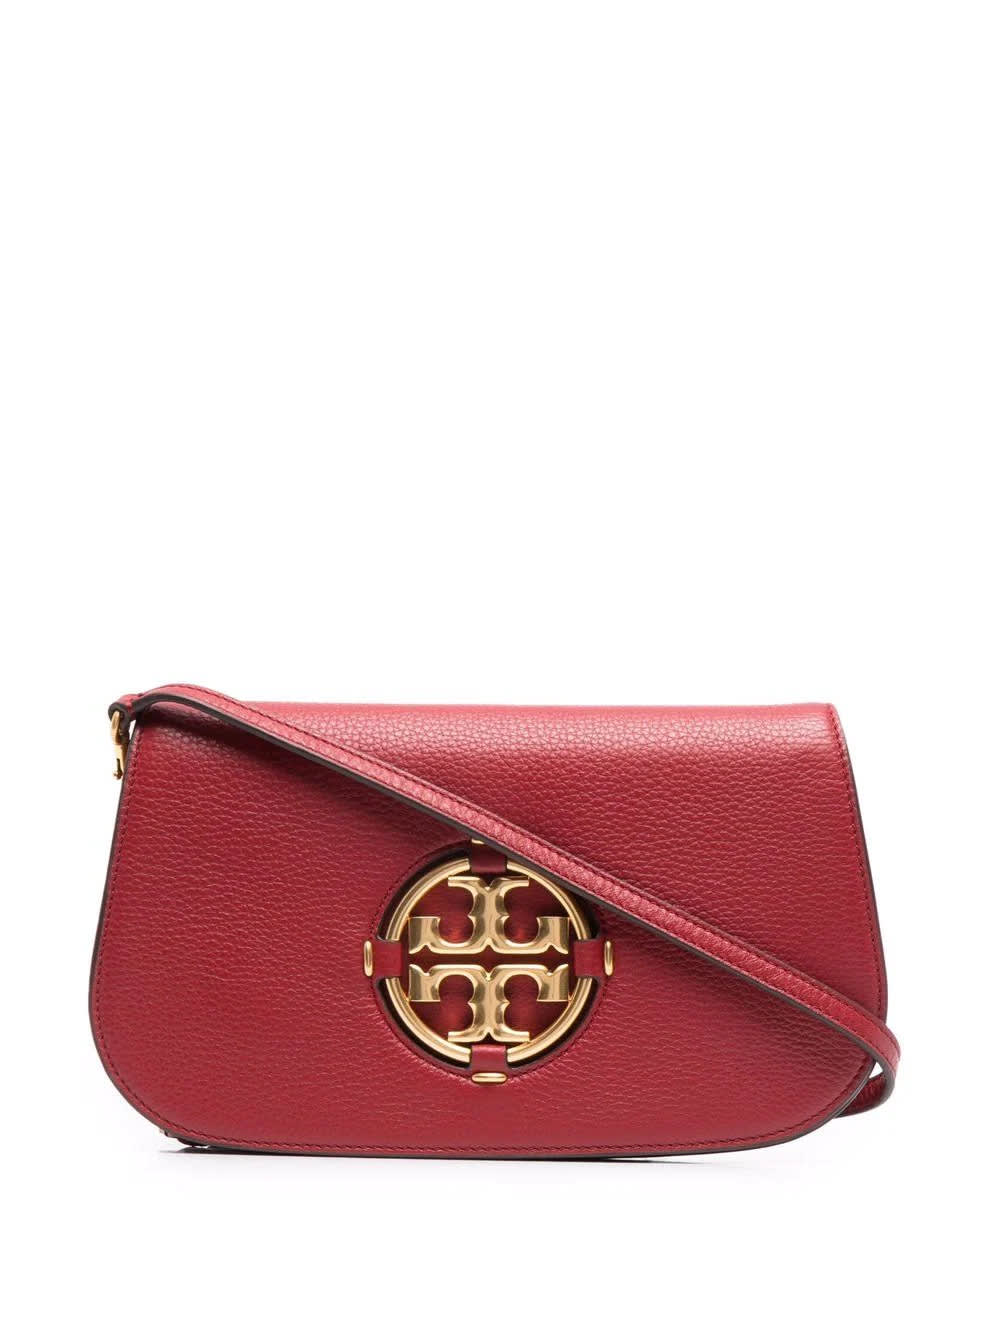 Tory Burch Miller Small Convertible Bag In Red Leather